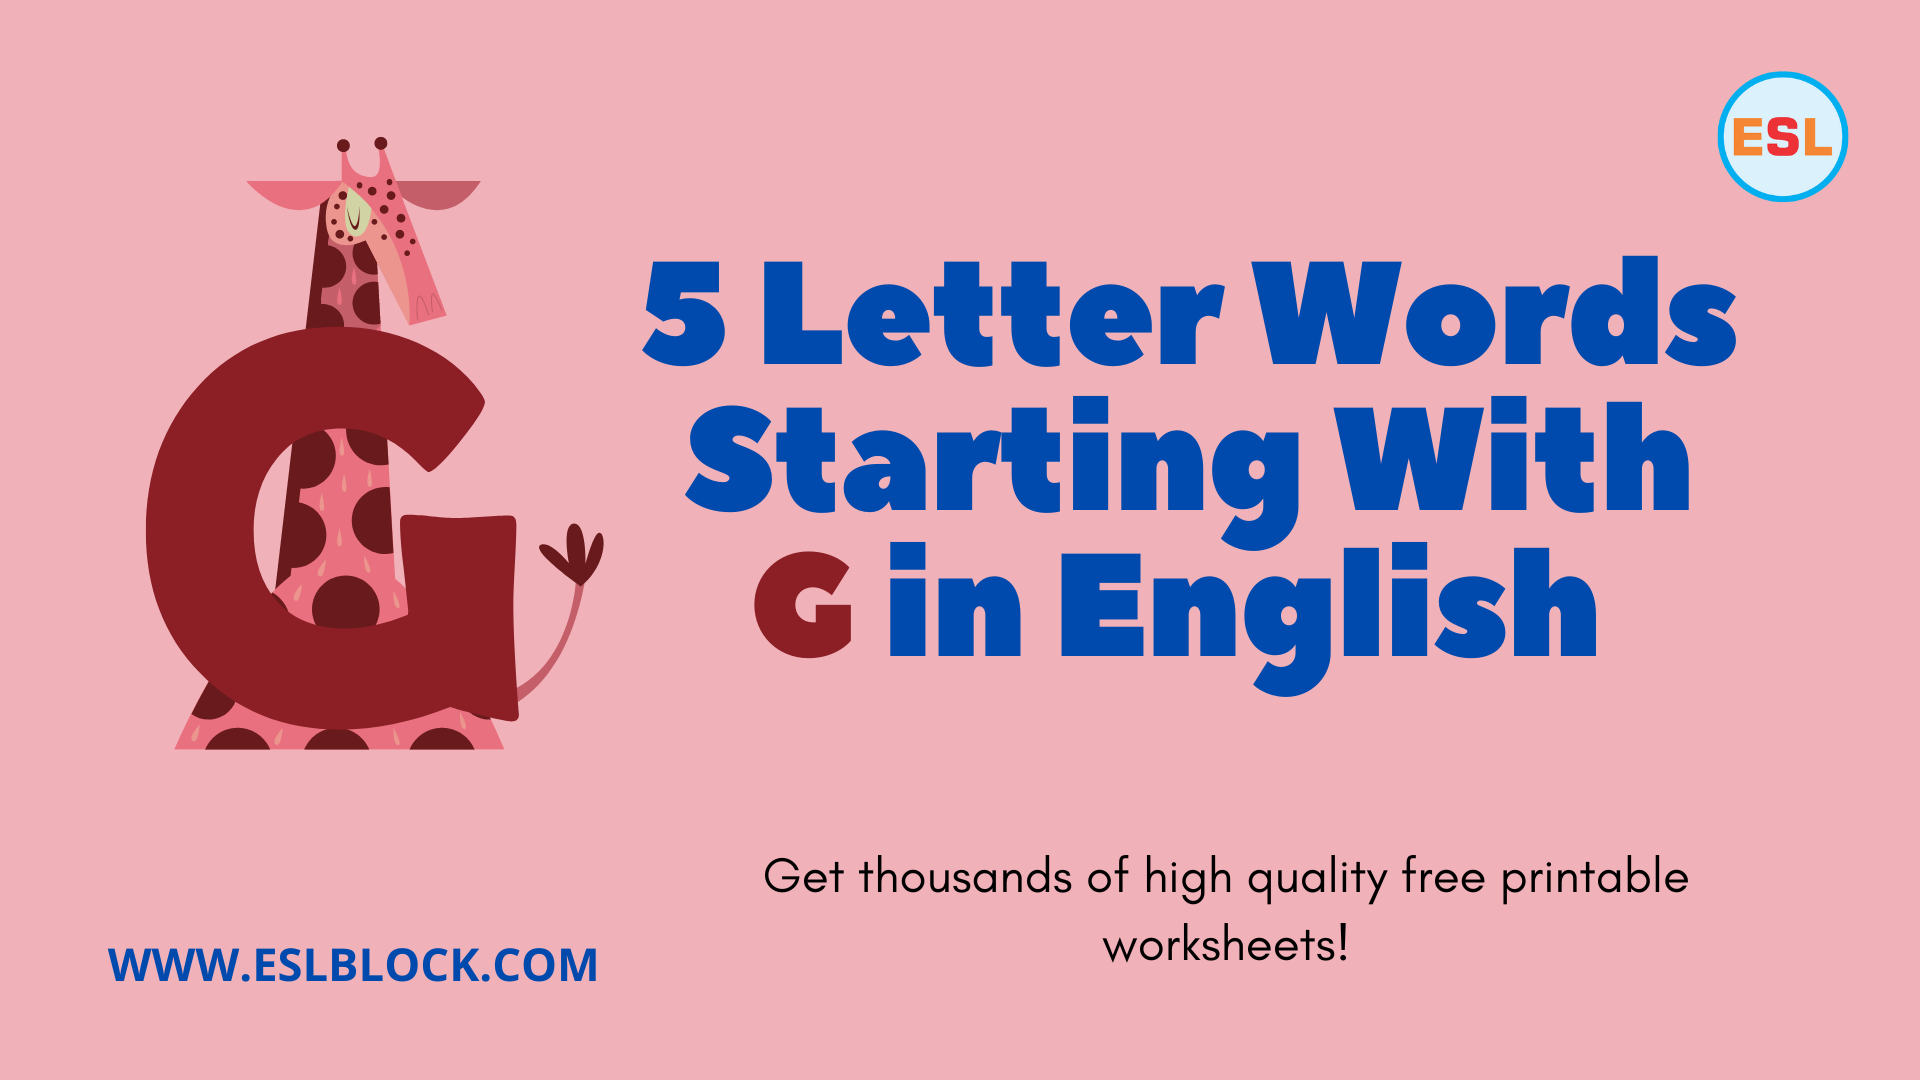 5 Letter Words, 5 Letter Words Starting With G, 5 Letter Words That Start With G, 5 Letter Words With G, 5 Letter G Words, English, English Grammar, English Vocabulary, English Words, List of 5 Letter Words, Vocabulary, Words That Start With G, G Words